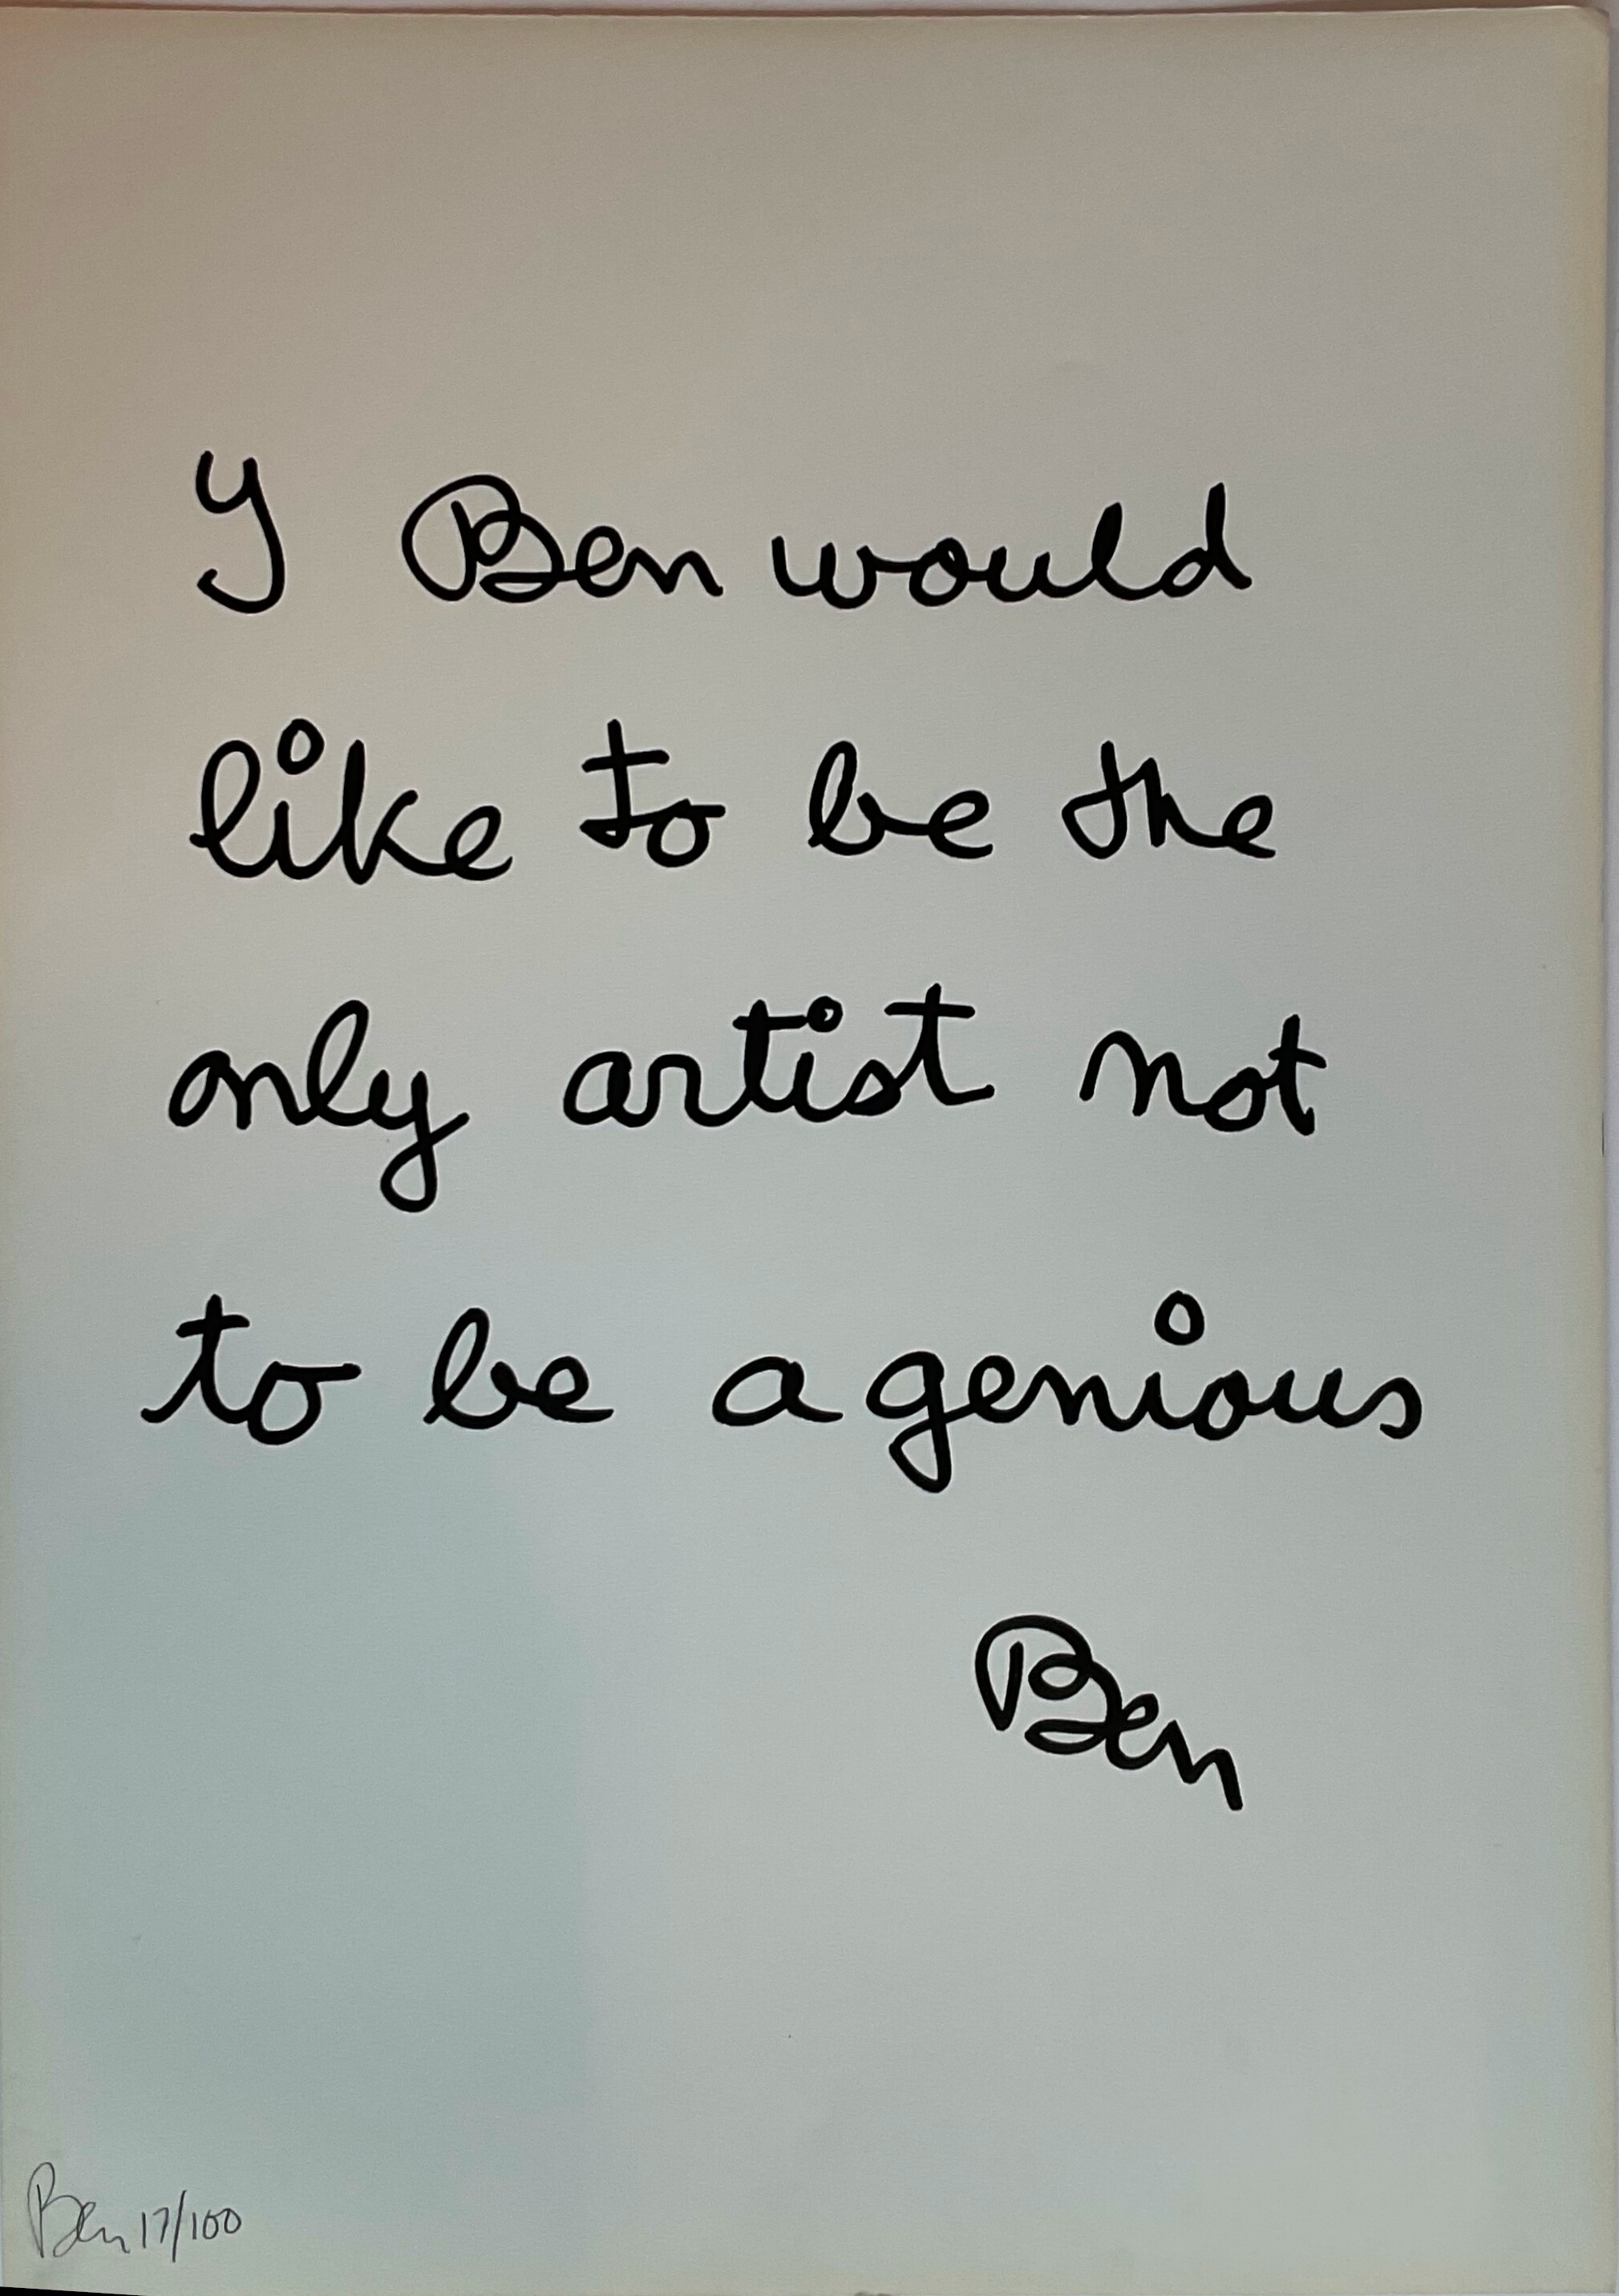 I Ben would like to be the only artist not to be a genius - Ben Vautier